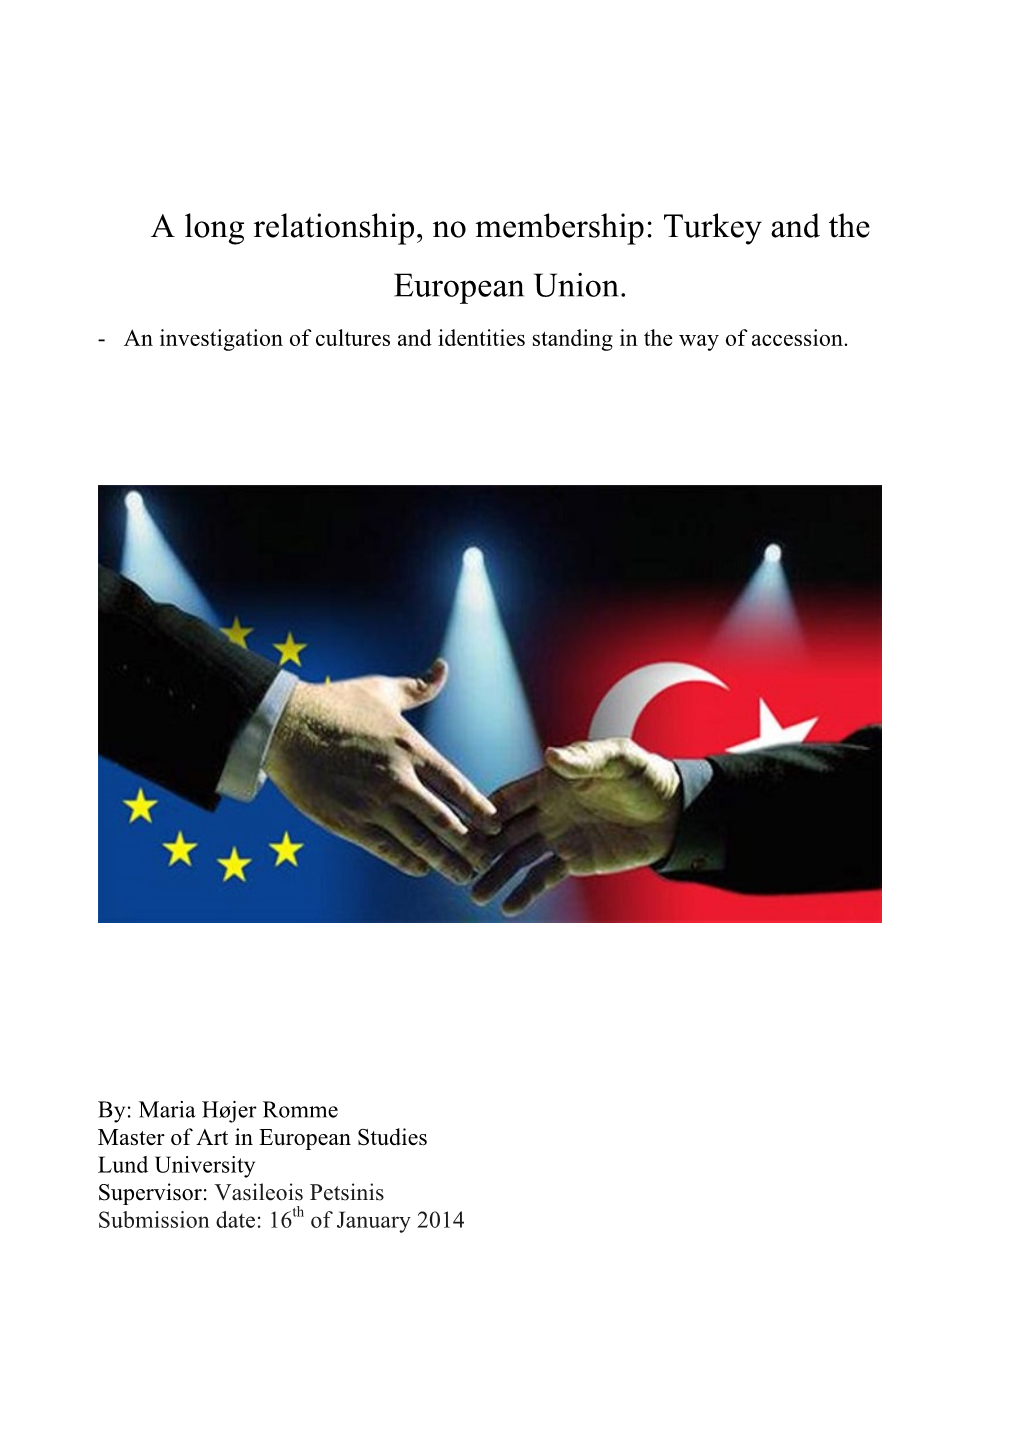 Turkey and the European Union. - an Investigation of Cultures and Identities Standing in the Way of Accession